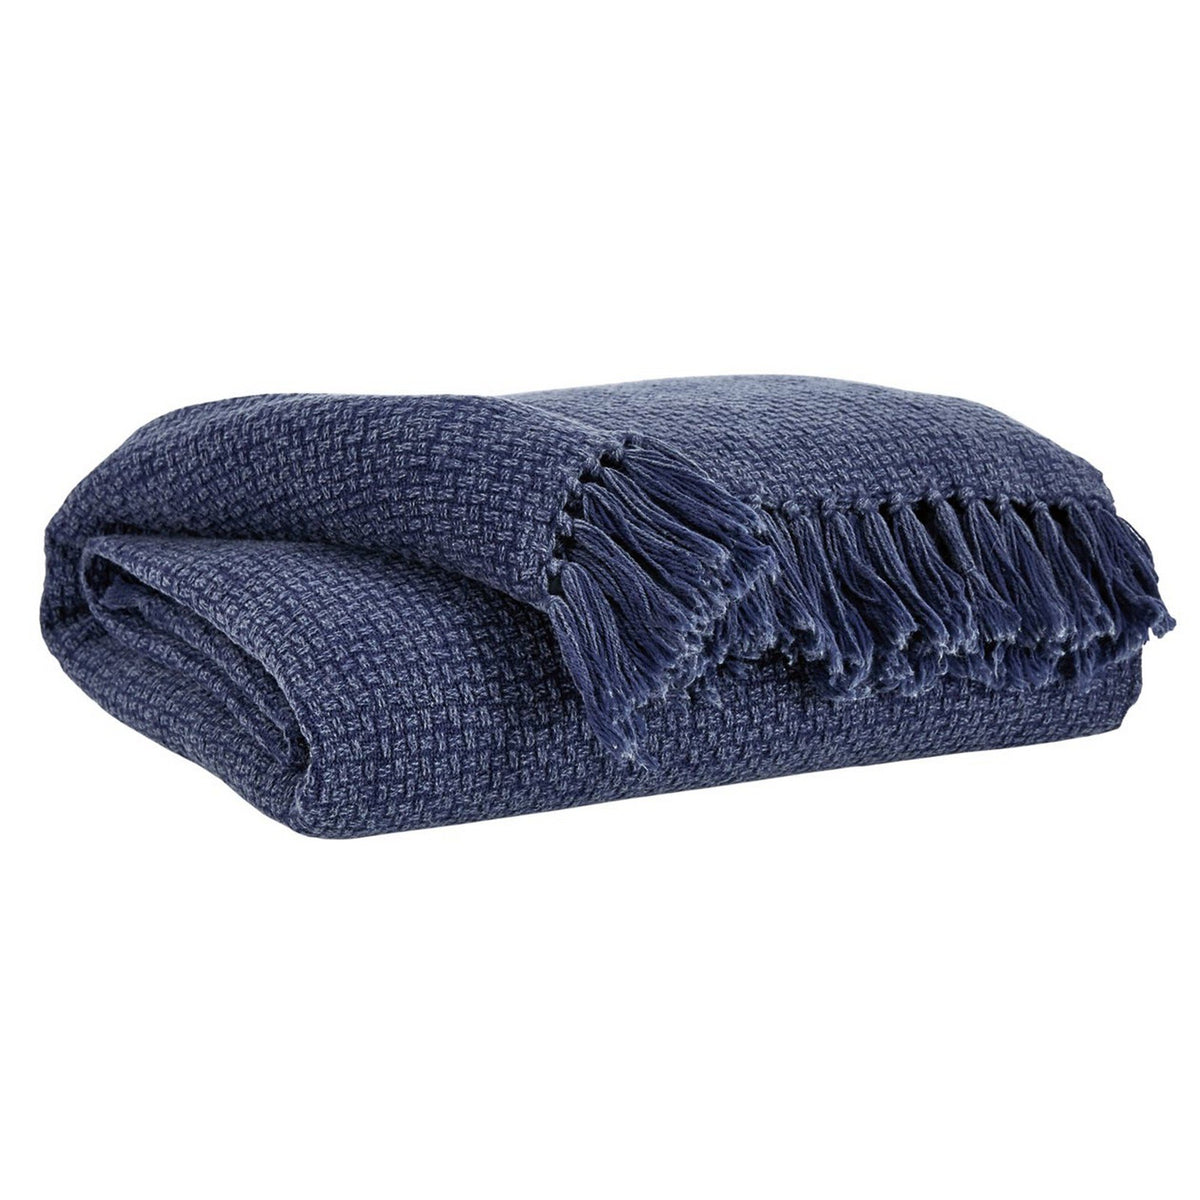 60 x 50 Cotton Throw with Textured and Fringe Details, Set of 3, Navy  Blue - BM226980